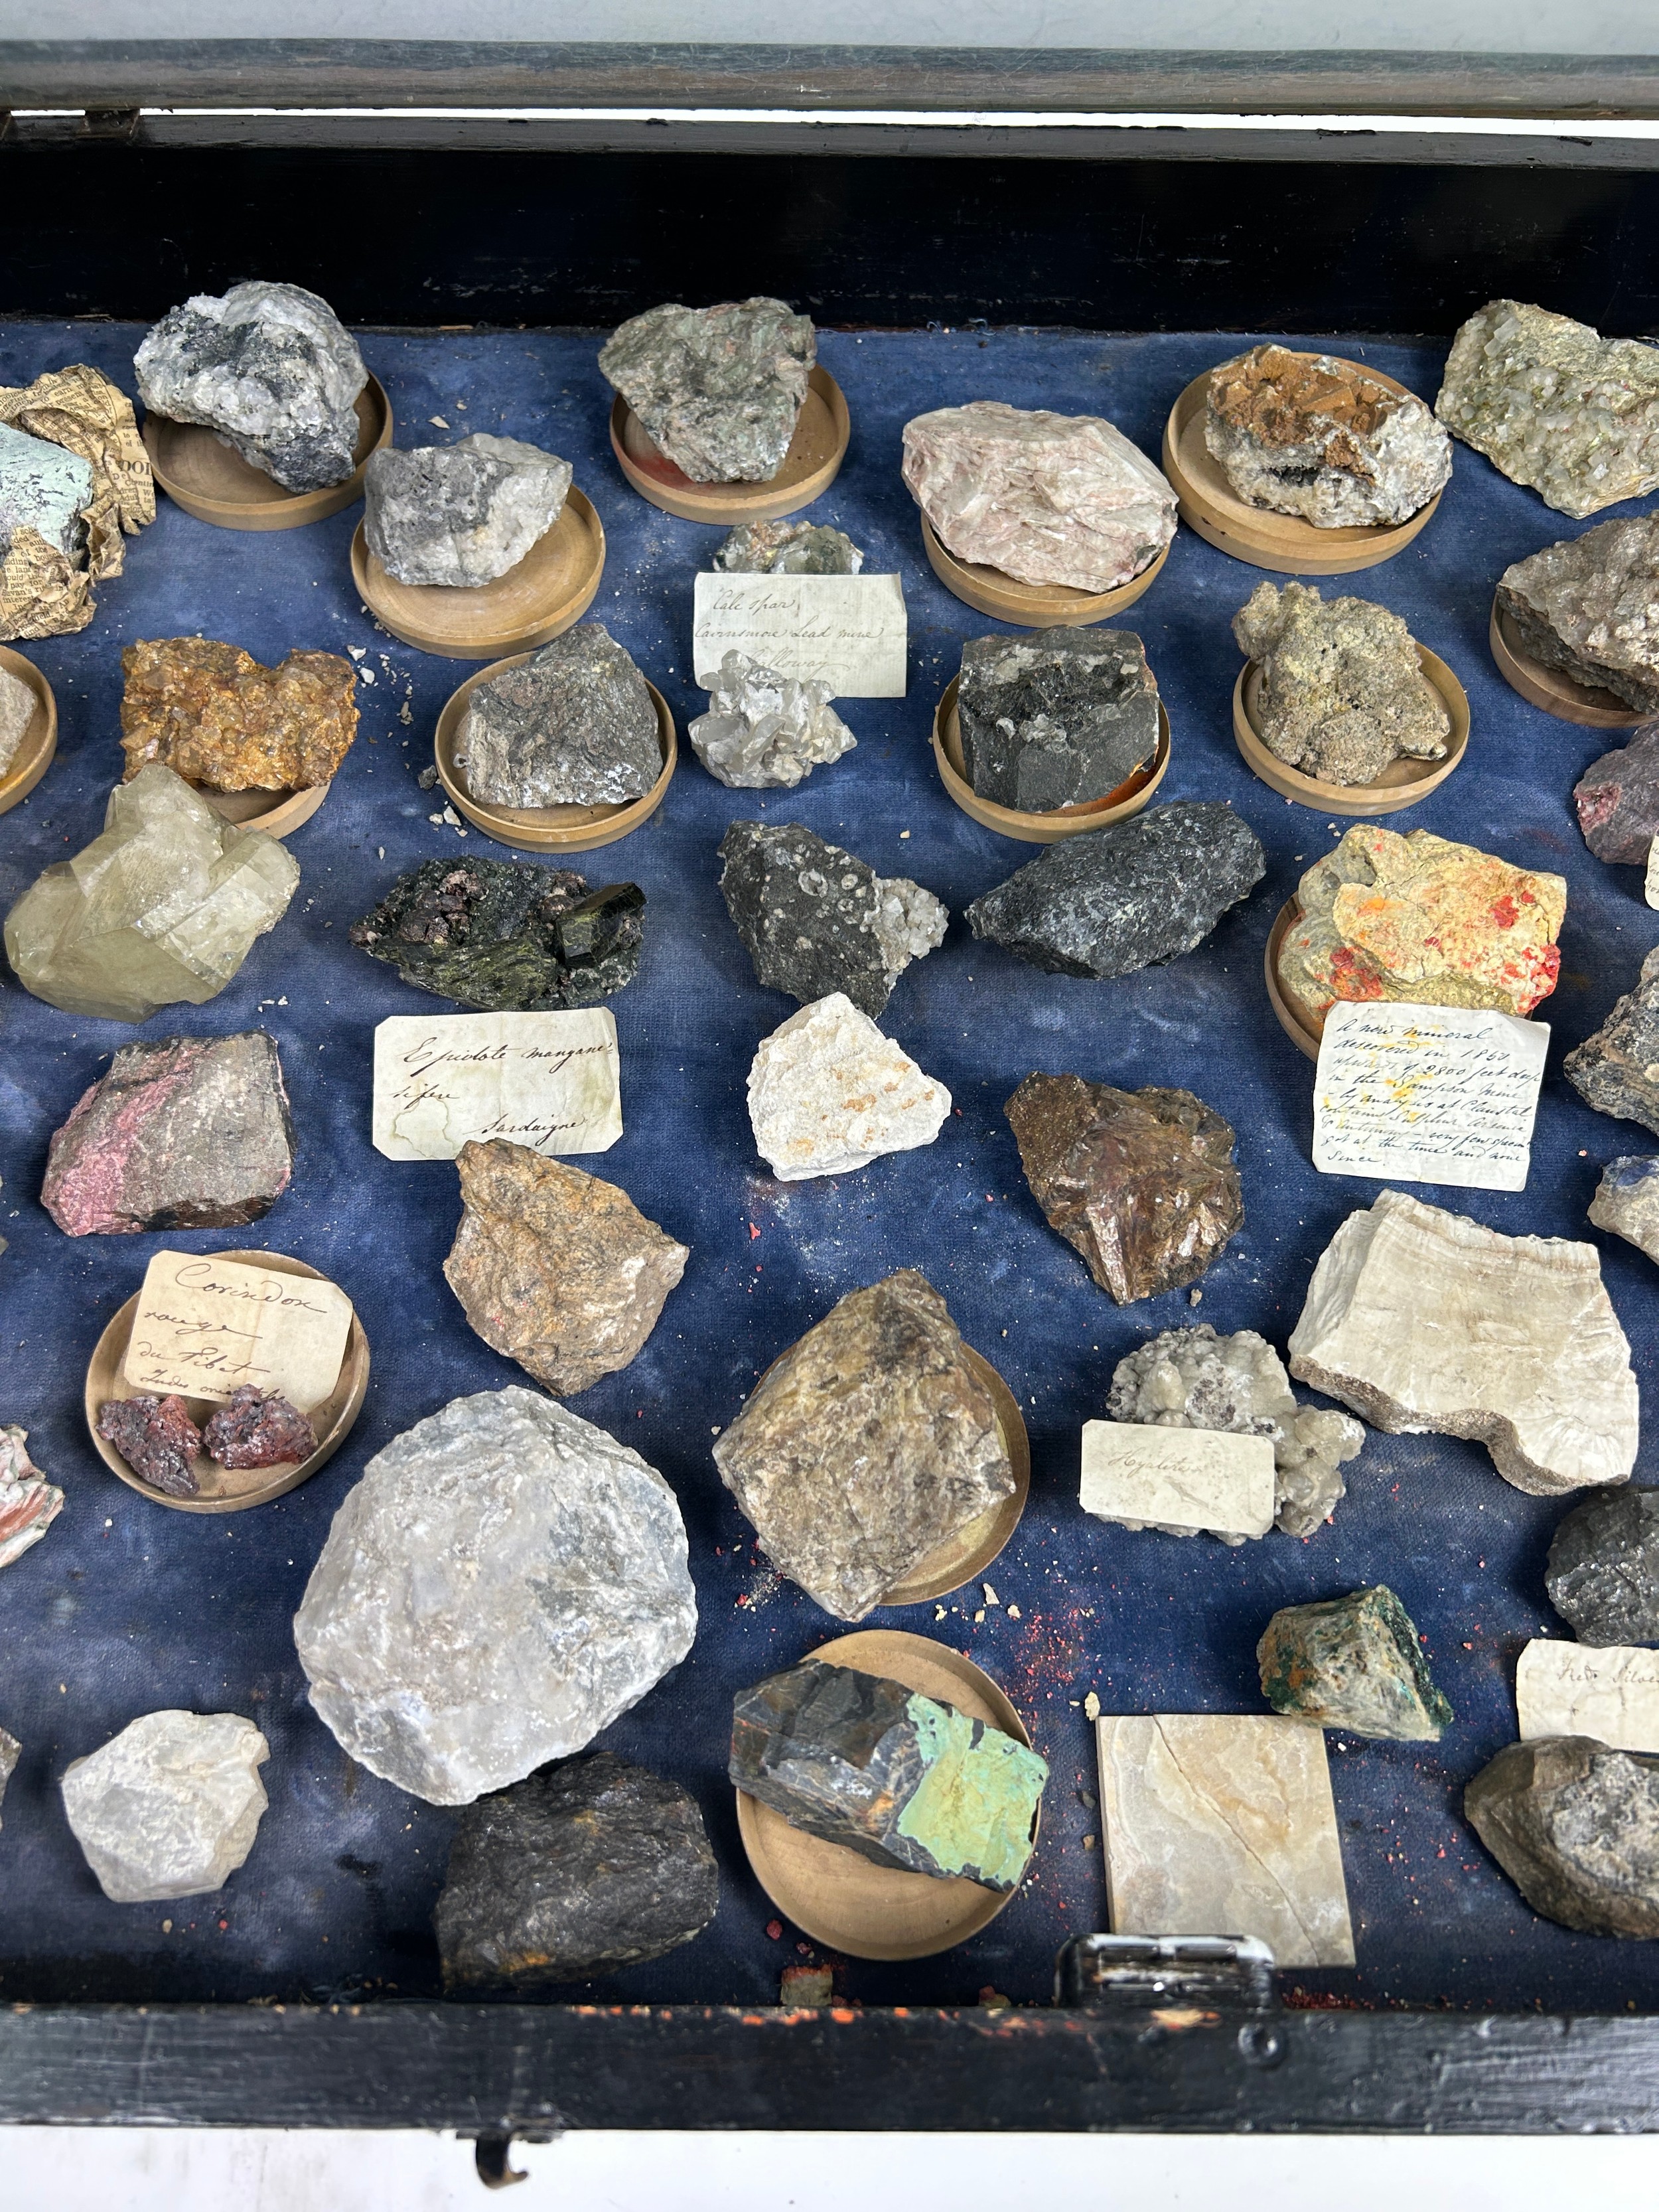 A RARE CABINET COLLECTION OF MINERALS CIRCA 1810-1860, including labels for some very important - Image 17 of 30